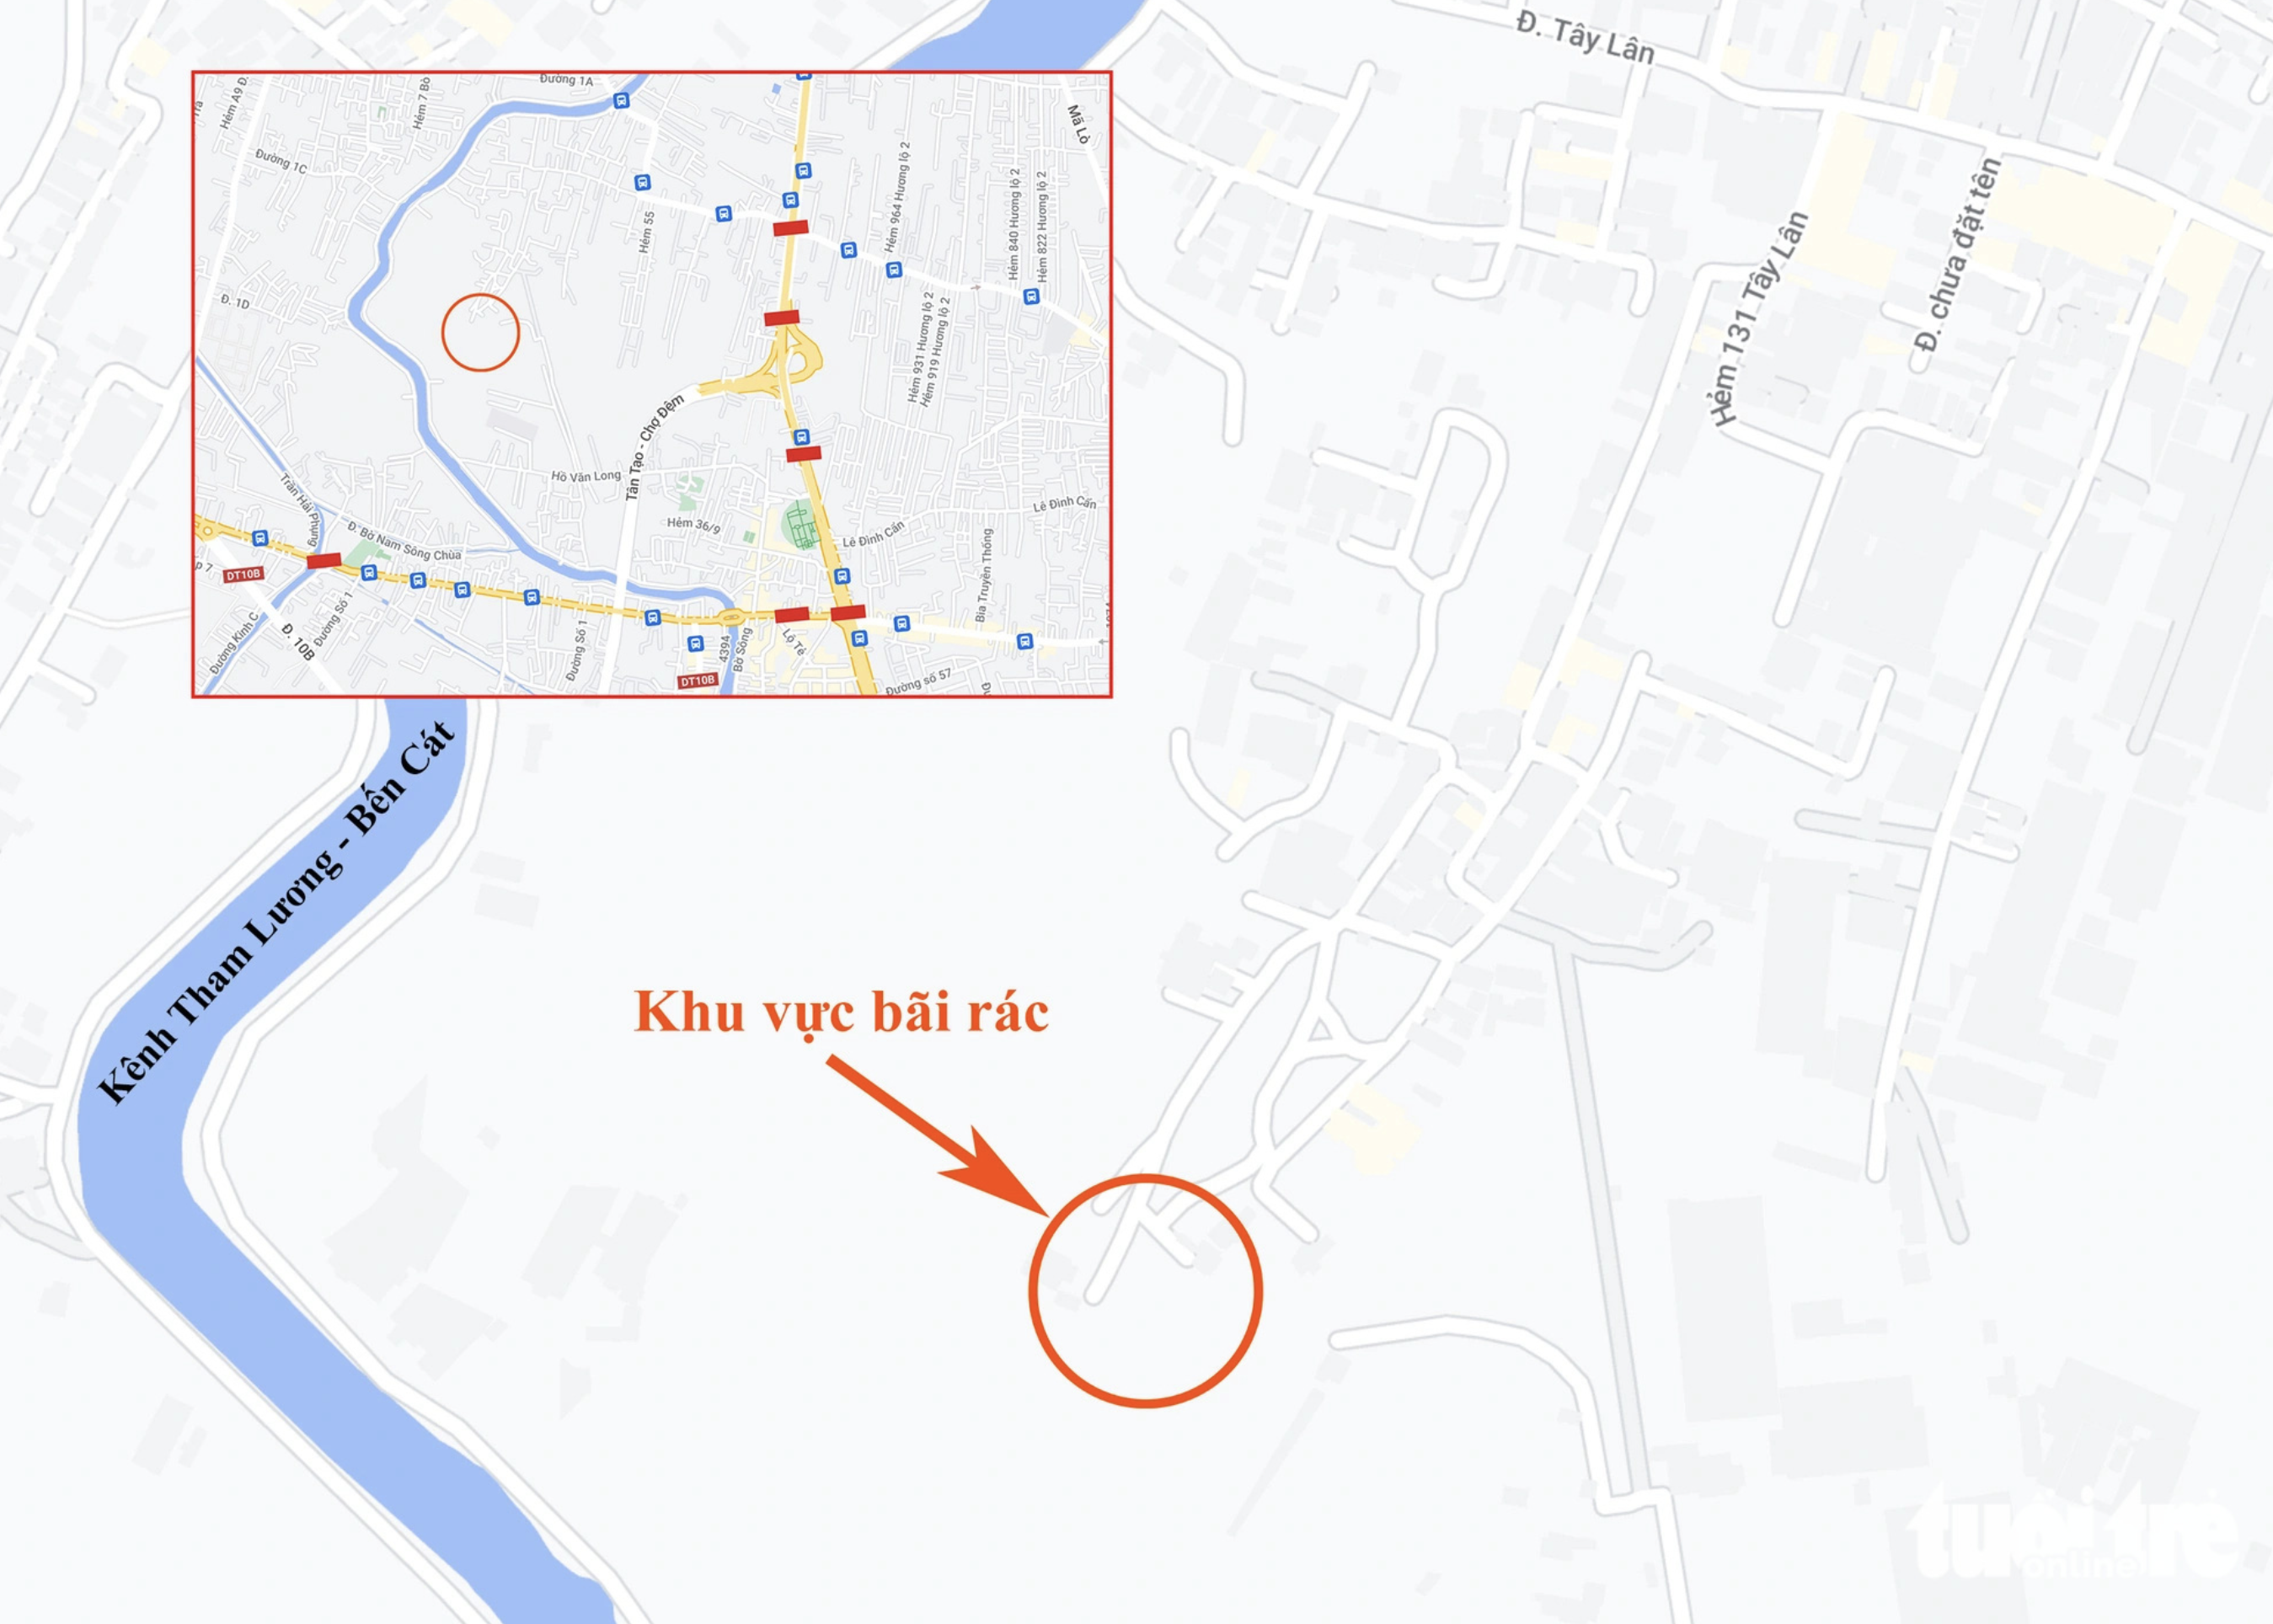 A map details an illegal dumpsite (marked in a circle), only 300 meters away from Tham Luong - Ben Cat Canal and 800 meters from Tay Lan Street in Binh Tan District. Photo: Chau Tuan / Tuoi Tre